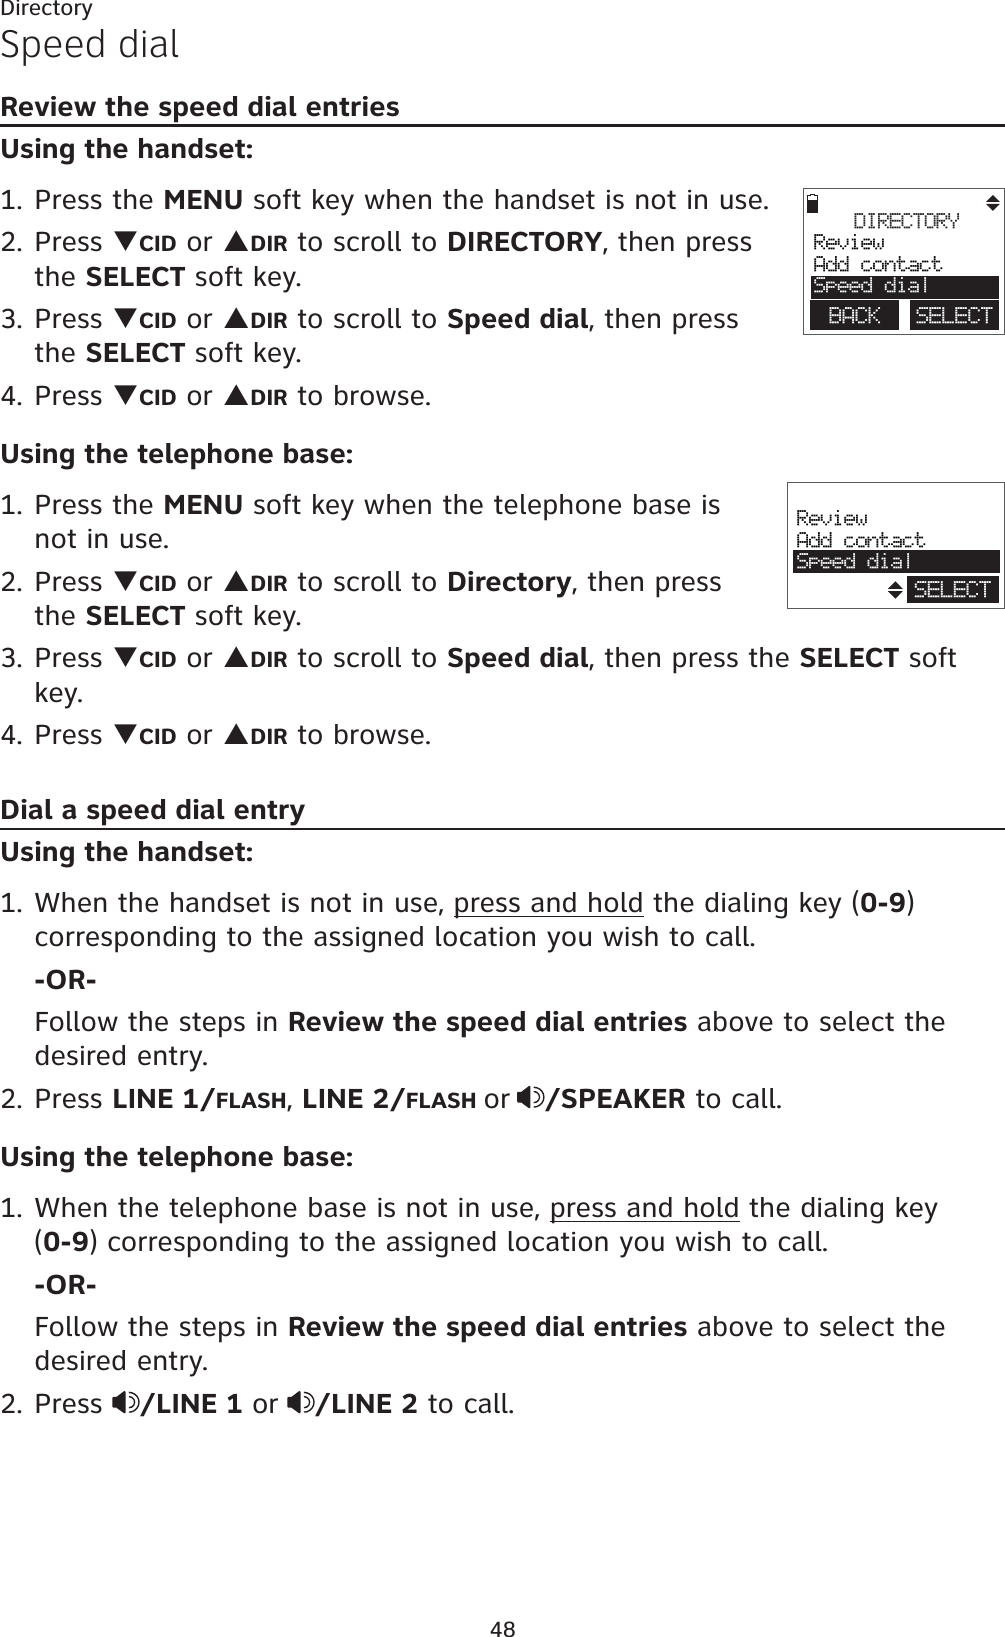 48DirectorySpeed dialReview the speed dial entriesUsing the handset:1. Press the MENU soft key when the handset is not in use.2. Press TCID or SDIR to scroll to DIRECTORY, then press the SELECT soft key.3. Press TCID or SDIR to scroll to Speed dial, then press the SELECT soft key.4. Press TCID or SDIR to browse.Using the telephone base:1. Press the MENU soft key when the telephone base is not in use.2. Press TCID or SDIR to scroll to Directory, then press the SELECT soft key. 3. Press TCID or SDIR to scroll to Speed dial, then press the SELECT soft key. 4. Press TCID or SDIR to browse. Dial a speed dial entryUsing the handset:1. When the handset is not in use, press and hold the dialing key (0-9)corresponding to the assigned location you wish to call. -OR-Follow the steps in Review the speed dial entries above to select the desired entry.2. Press LINE 1/FLASH,LINE 2/FLASH or /SPEAKER to call.Using the telephone base:1. When the telephone base is not in use, press and hold the dialing key    (0-9) corresponding to the assigned location you wish to call. -OR-Follow the steps in Review the speed dial entries above to select the desired entry.2. Press  /LINE 1 or /LINE 2 to call.DIRECTORYReviewAdd contactSpeed dialBACK    SELECTReviewAdd contactSpeed dialSELECT